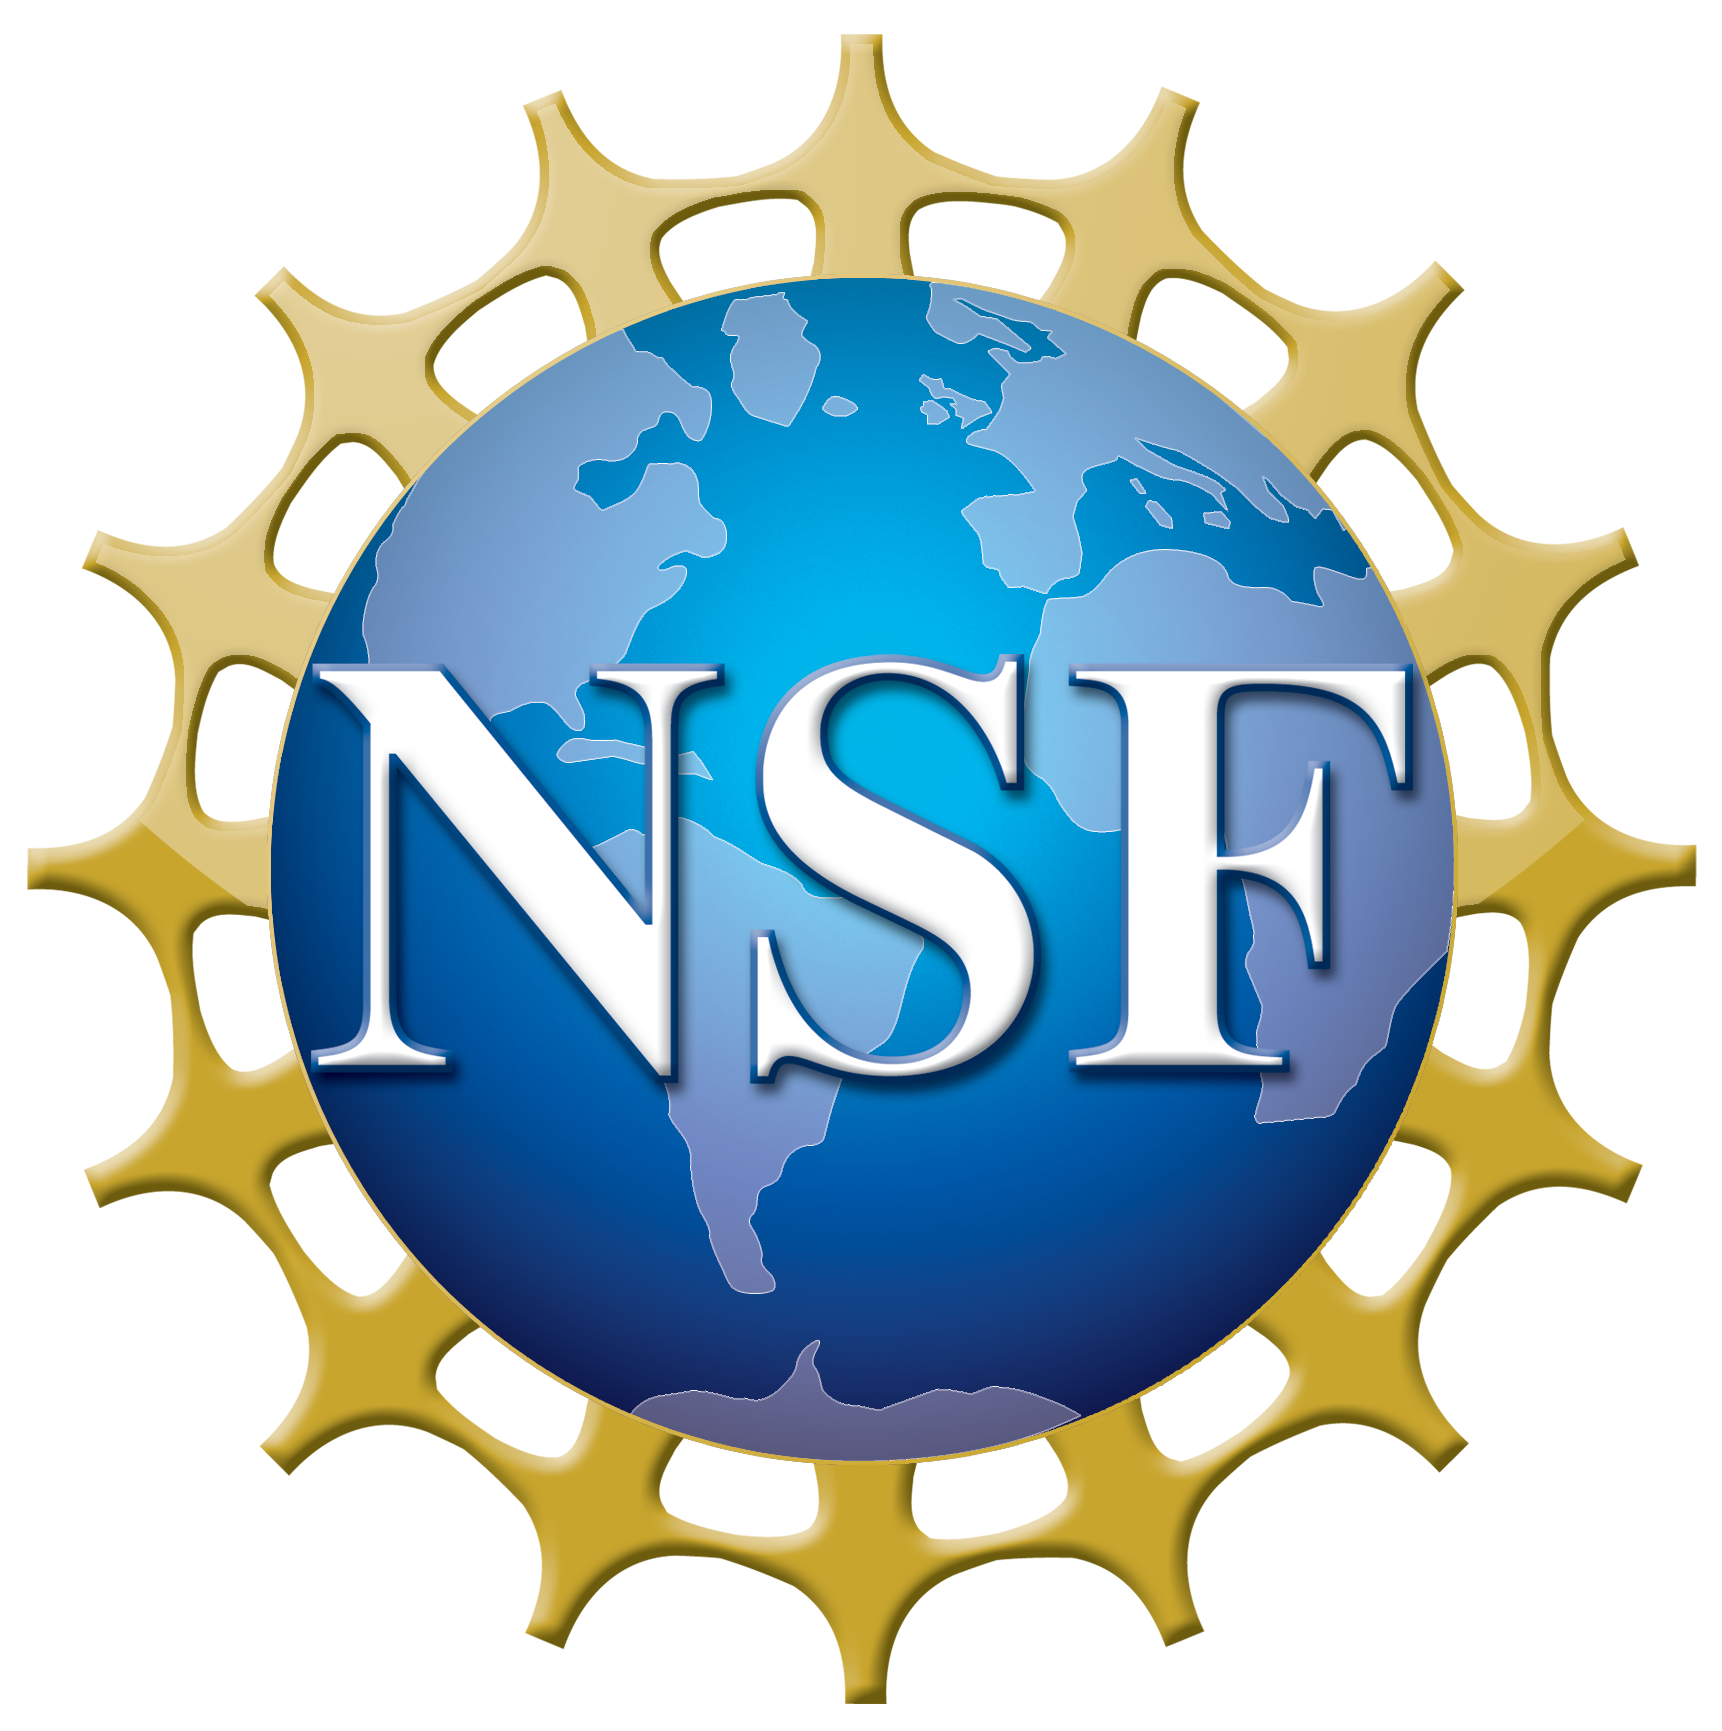 The National Science Foundation Logo - a blue globe outlined with a gold crown-looking pattern and the letters NSF in the center